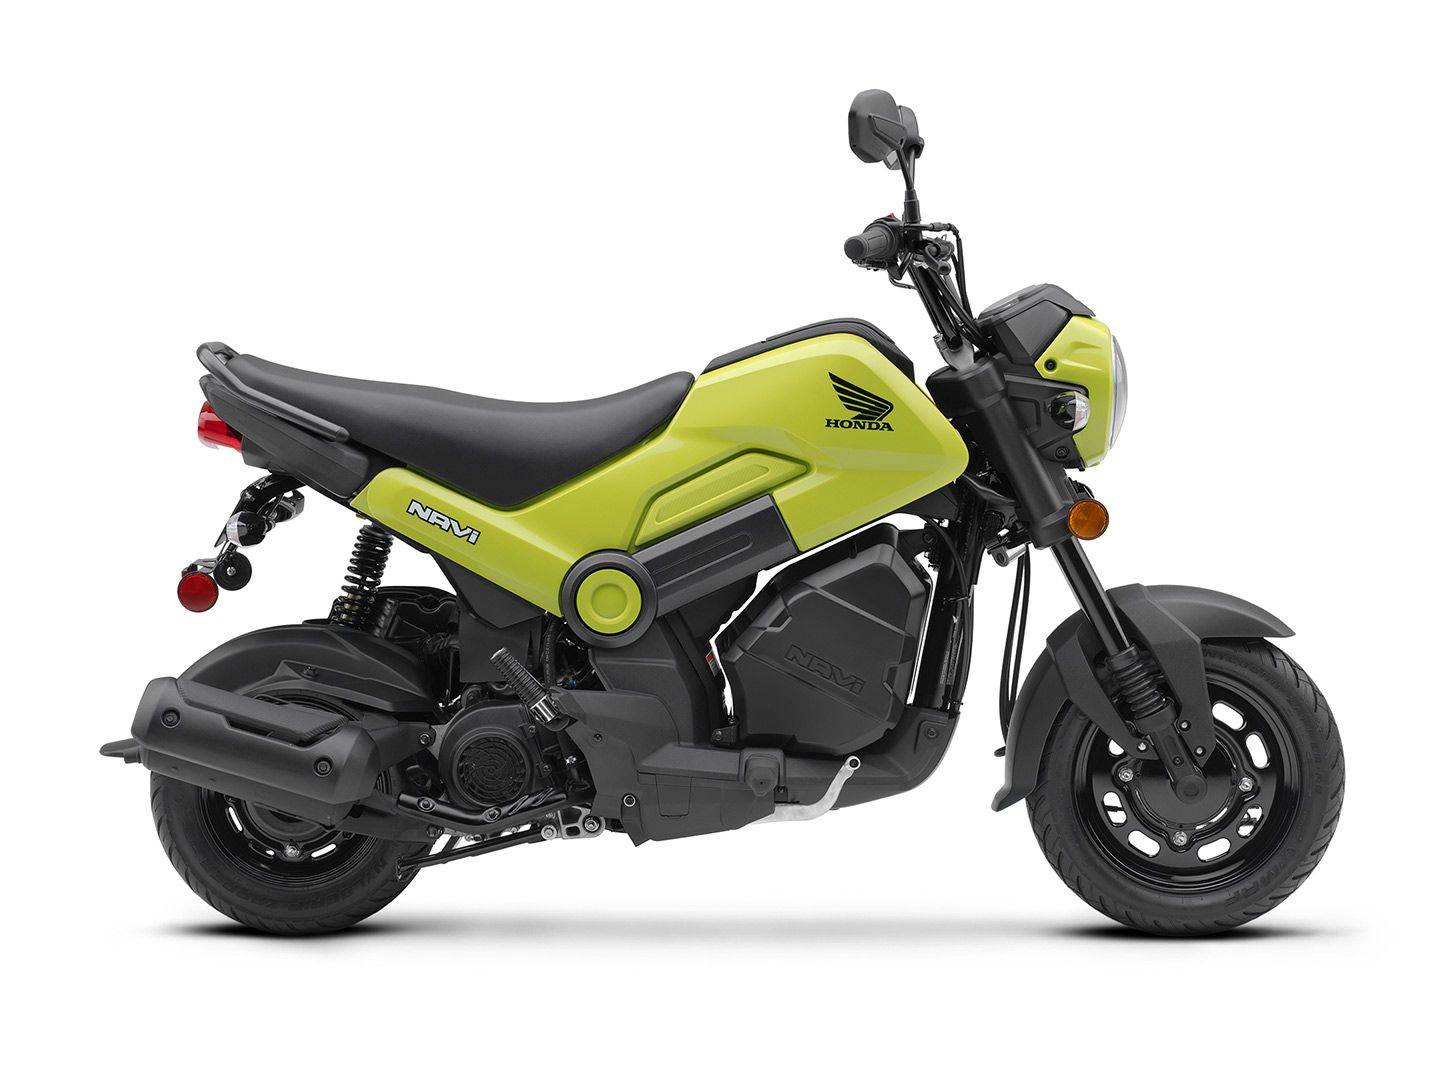 Grasshopper Green is one of four color options for the Navi.